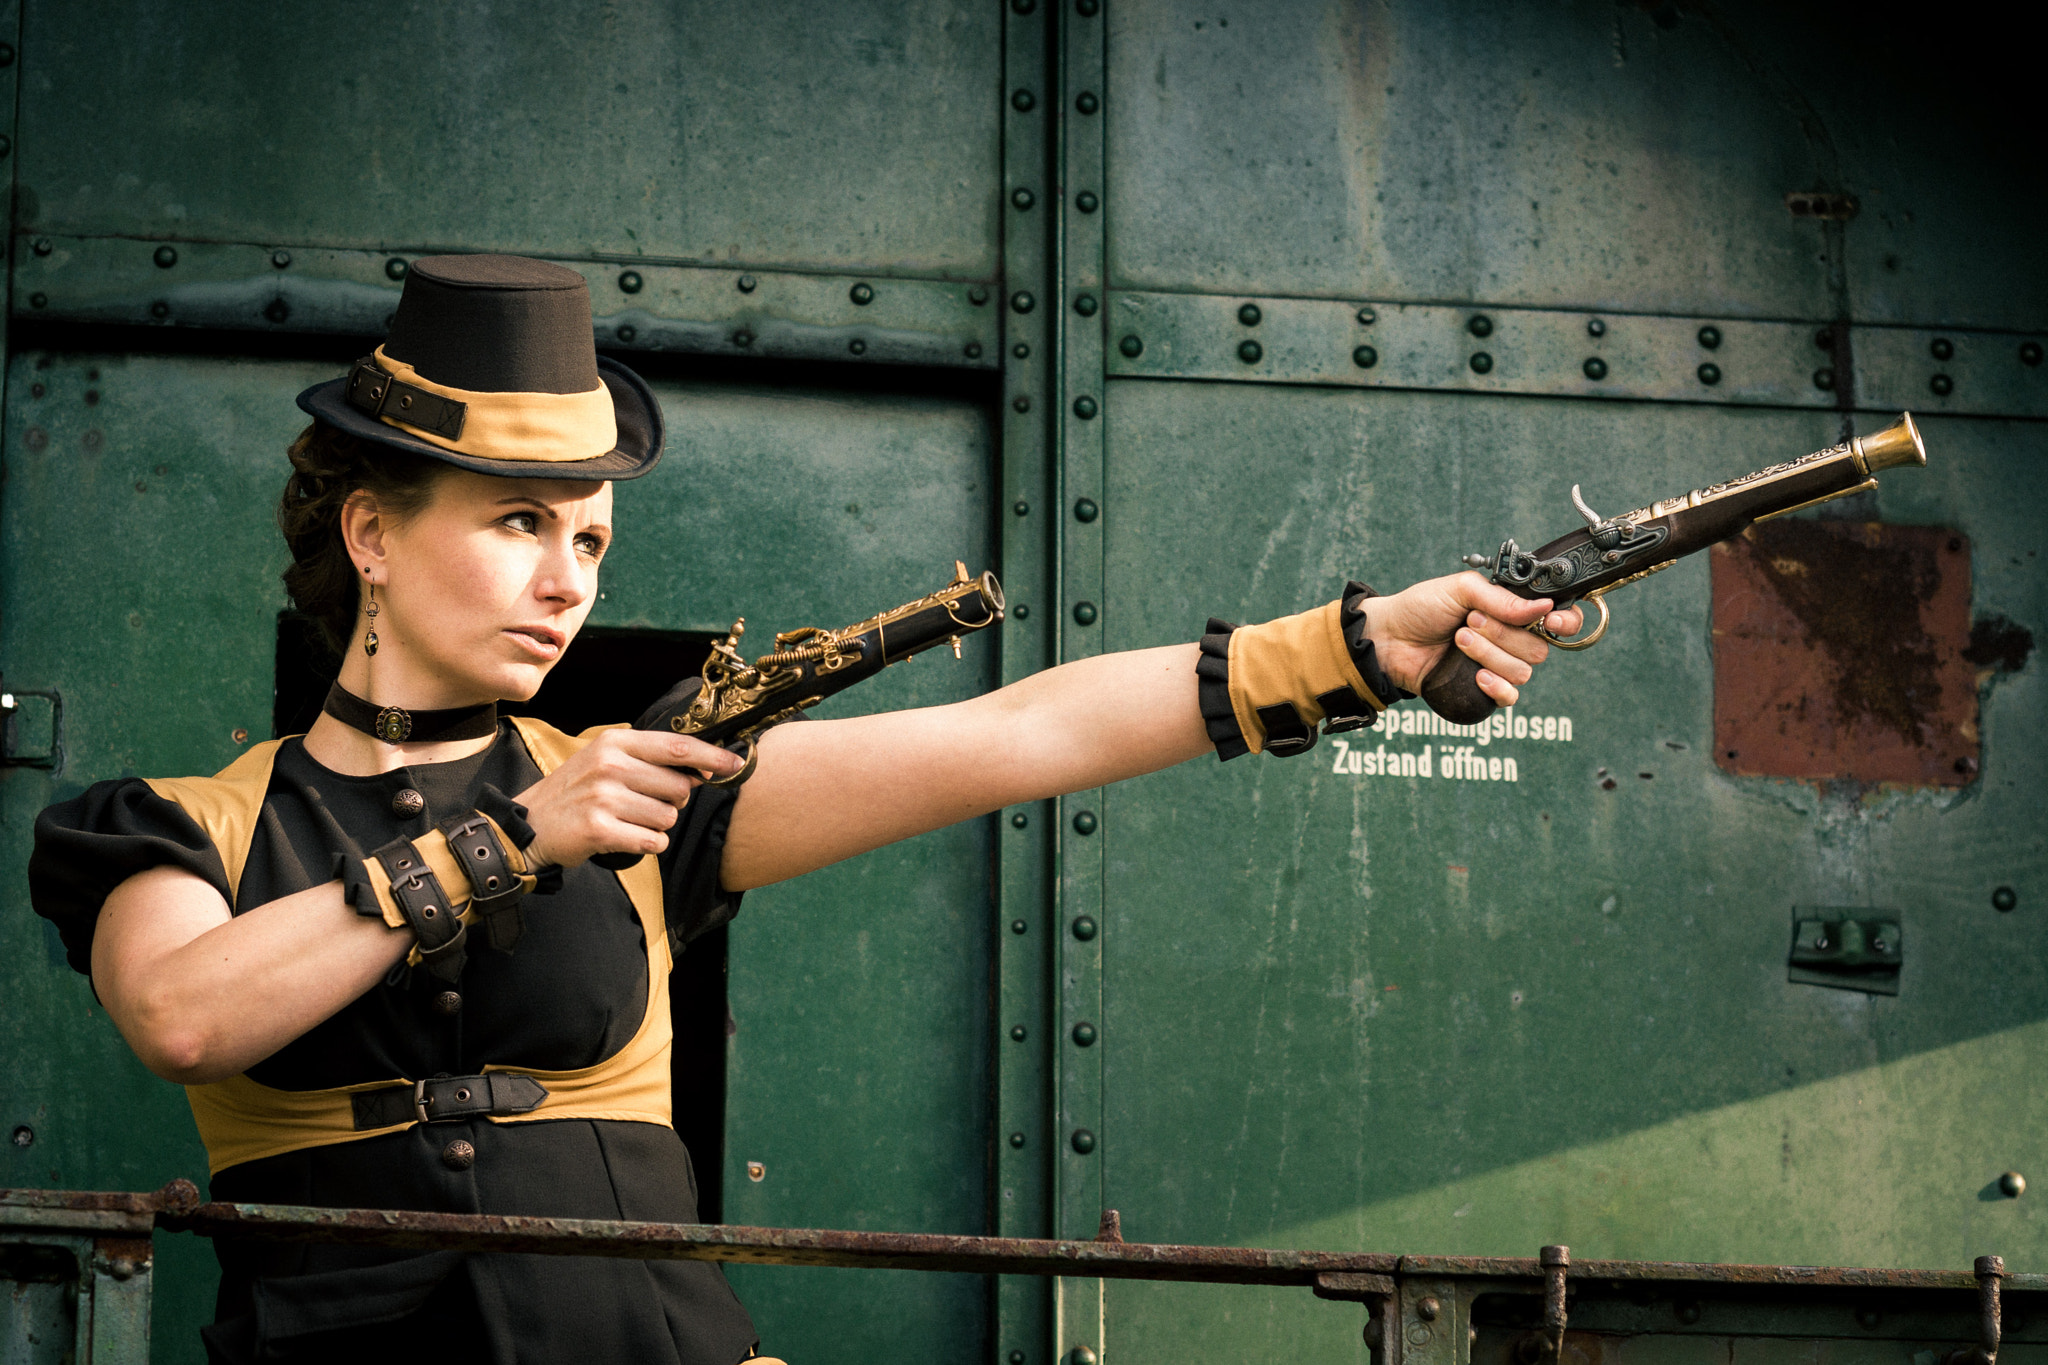 Sony SLT-A77 sample photo. Jessicat in steam punk outfit photography